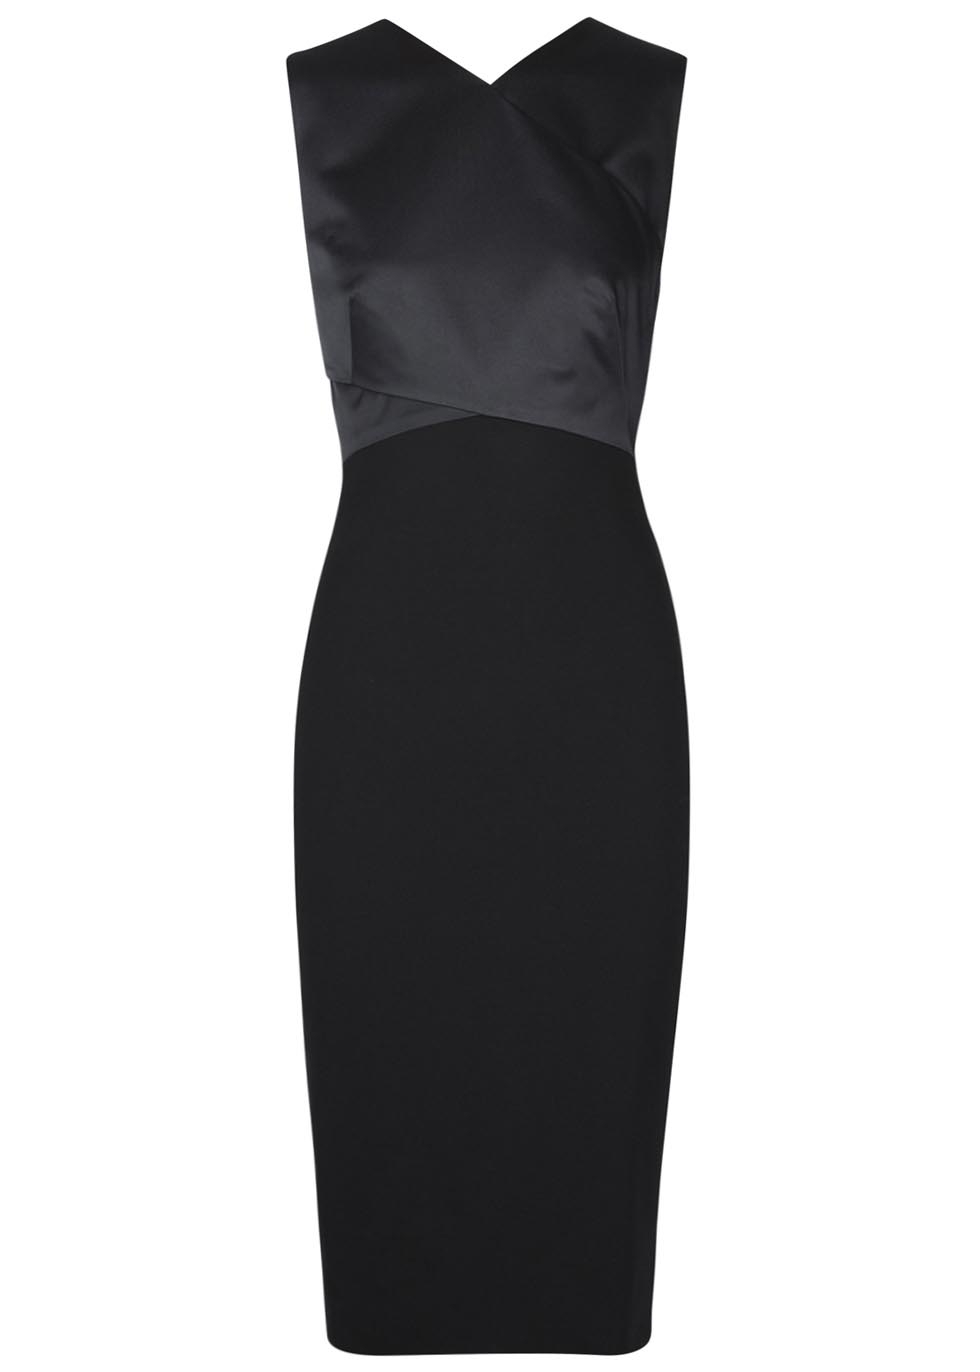 Black two-tone crossover dress